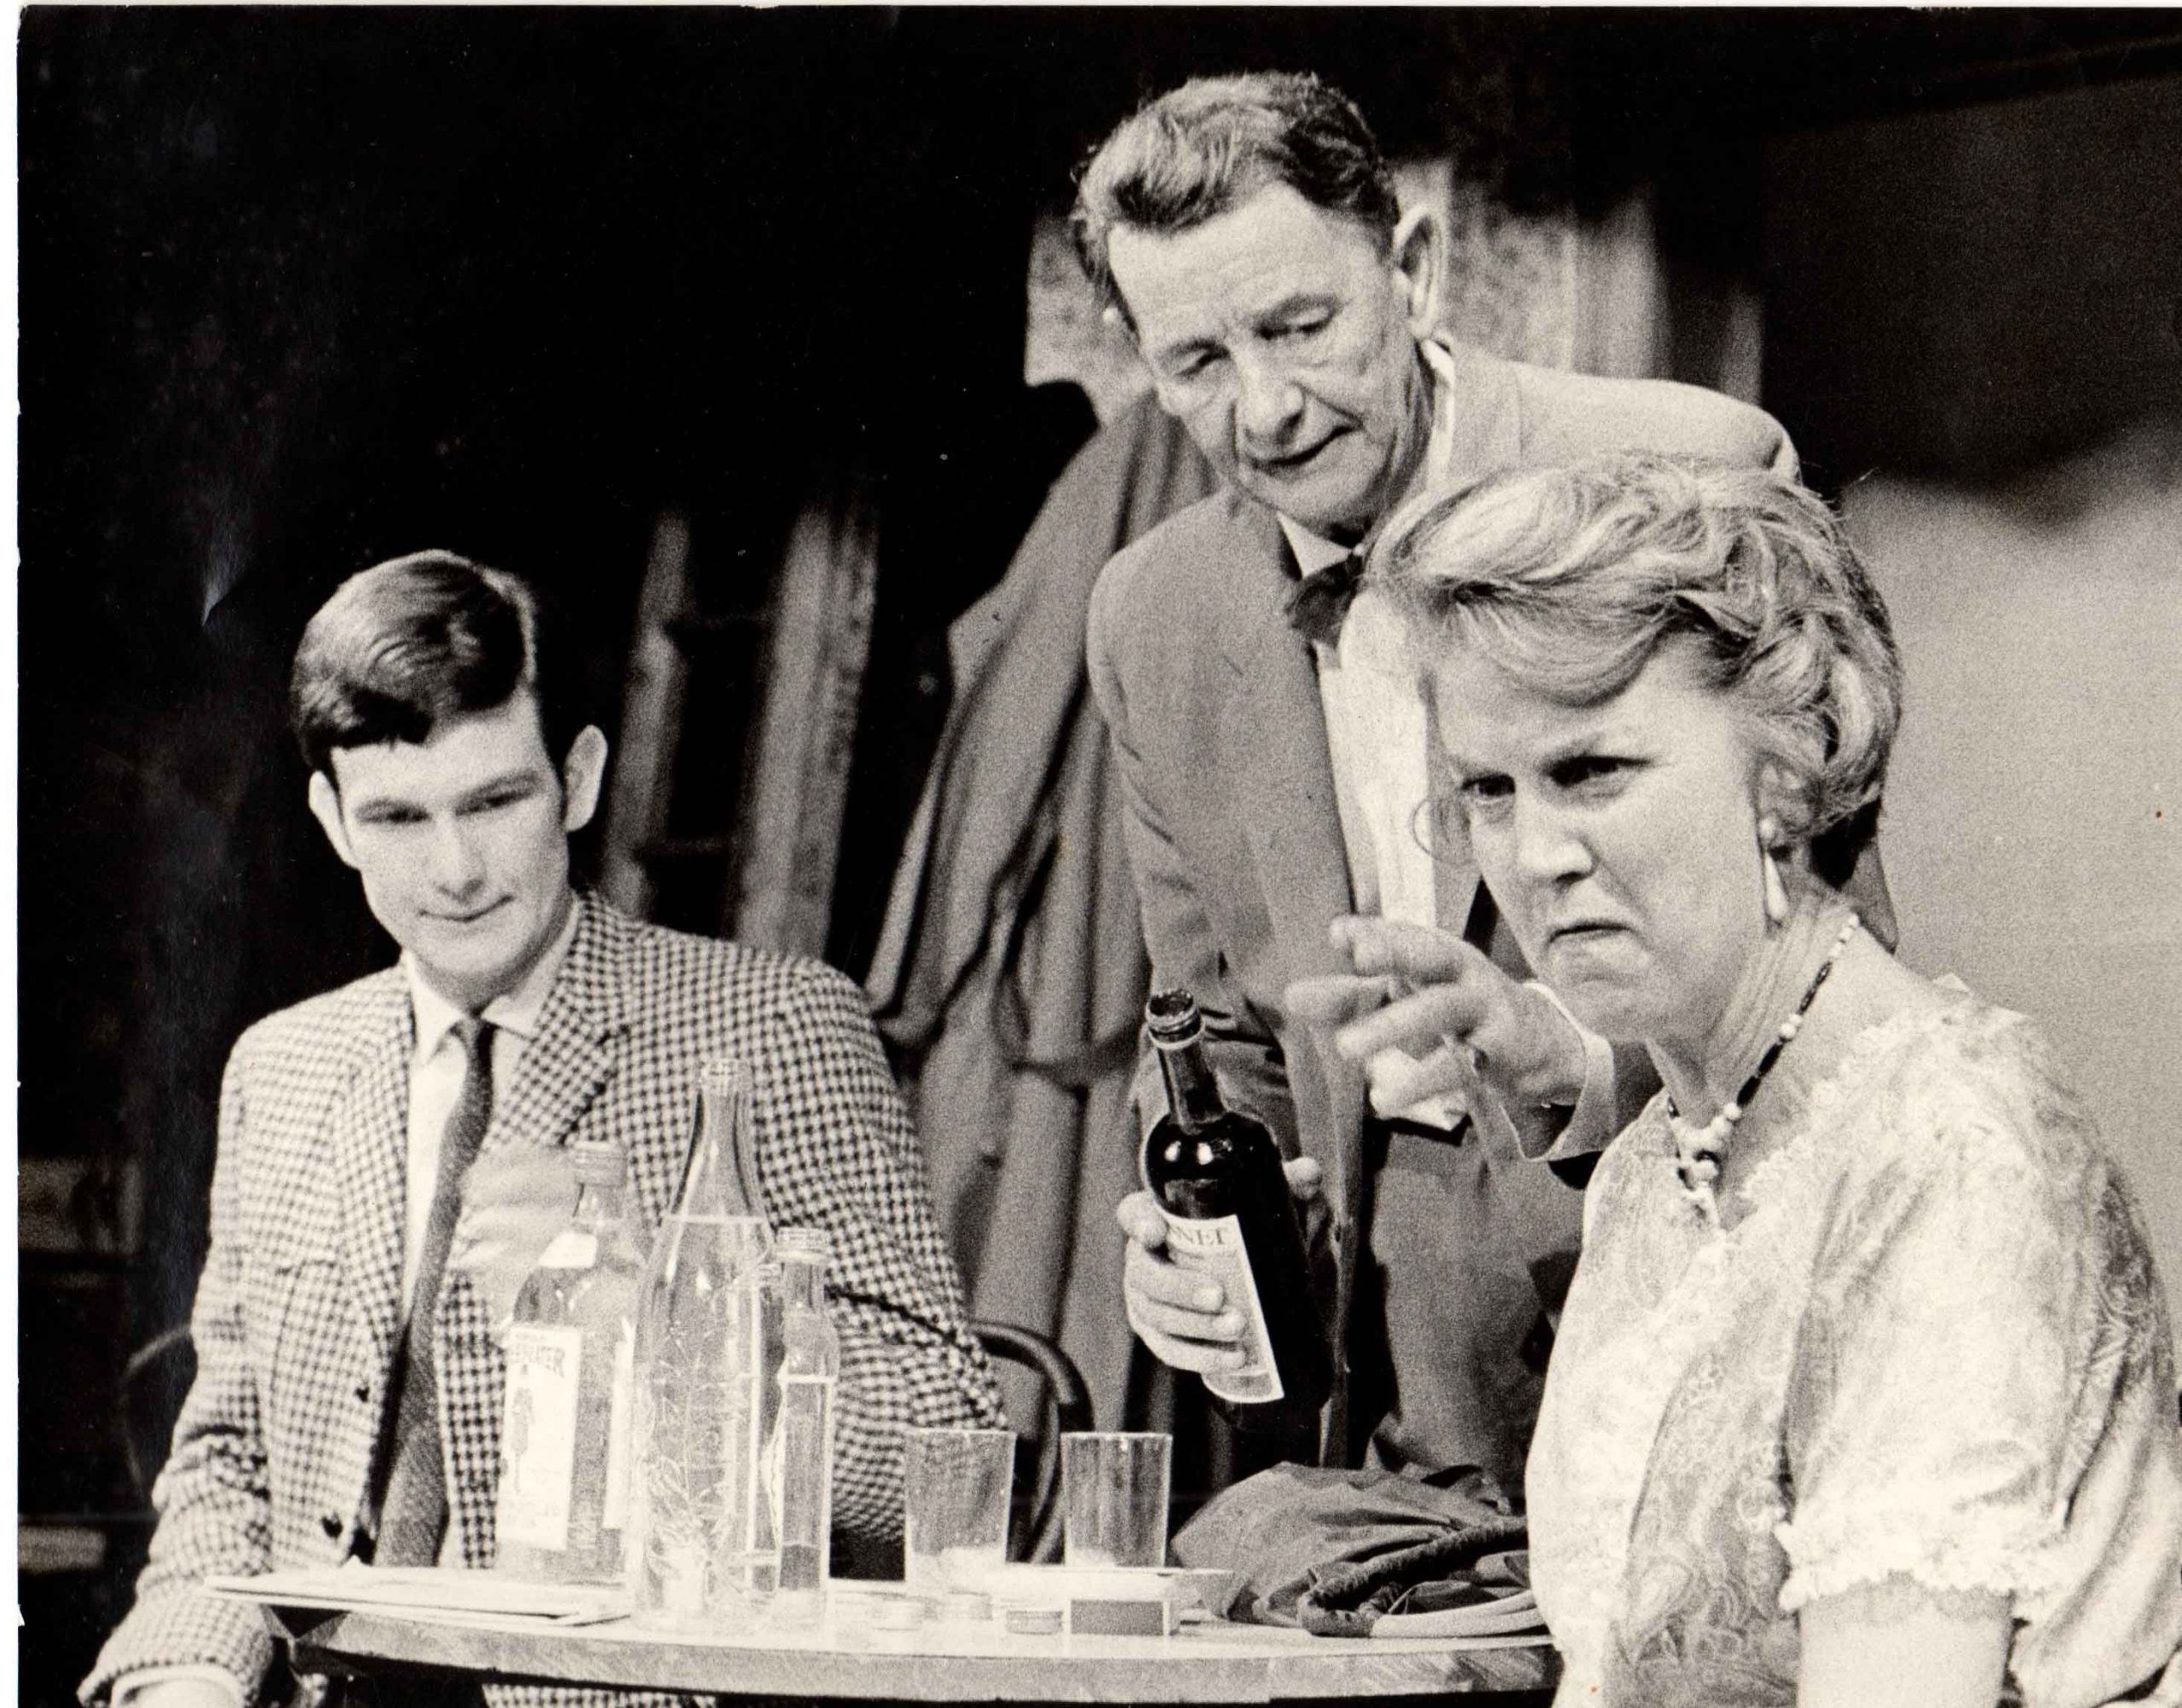 David Foster, Alexander Archdale, Joan Bruce in The Entertainer 1968, photo by John Walsh